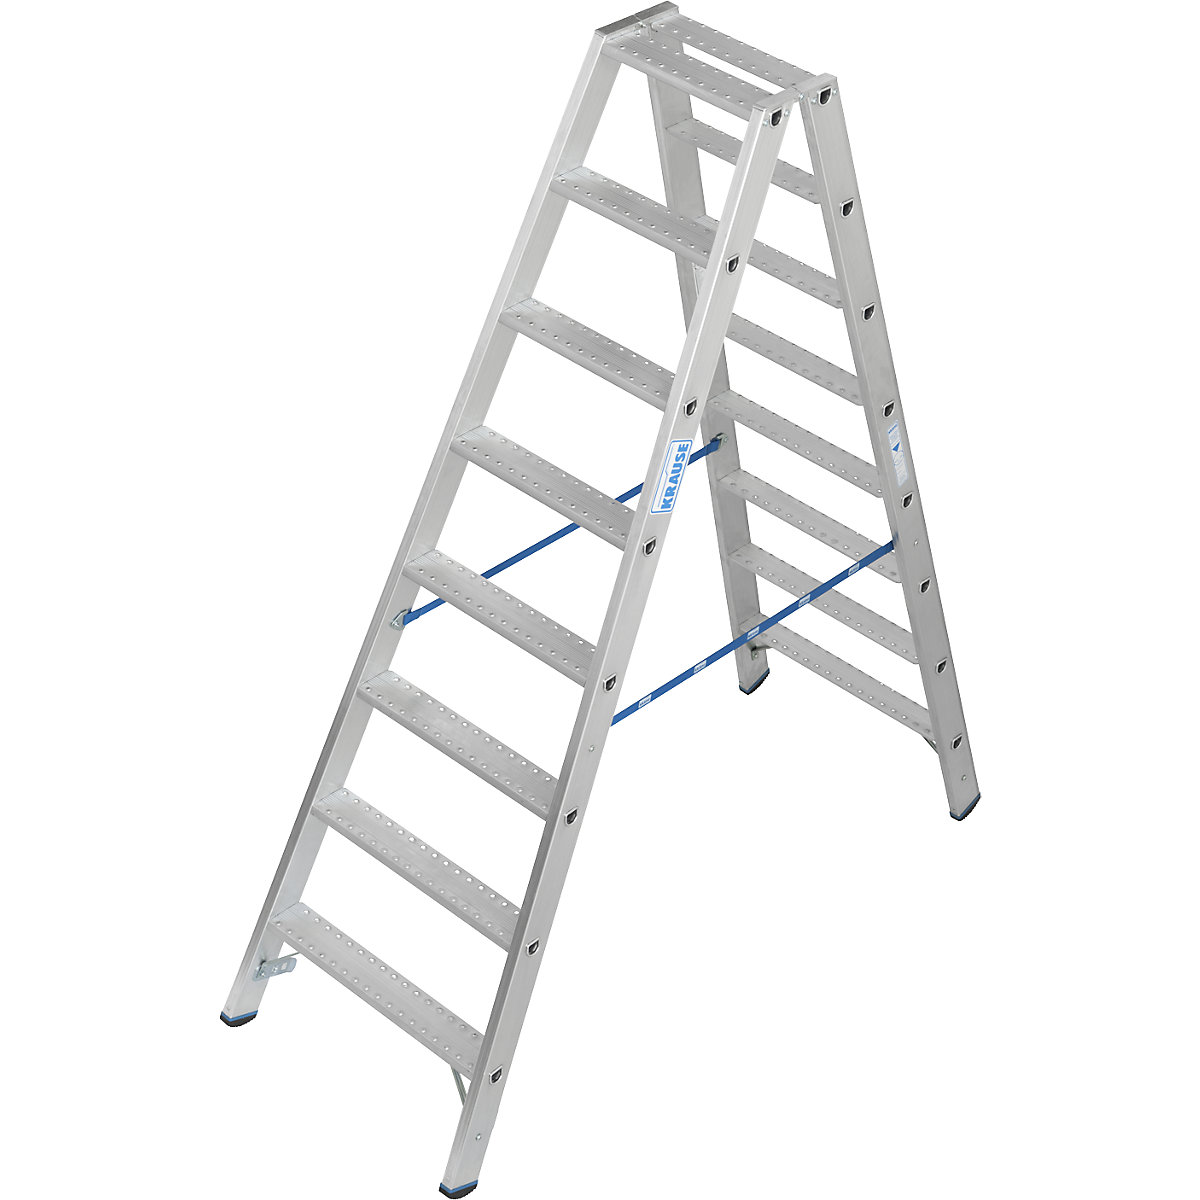 Aluminium stepladder, with R13 anti-slip properties – KRAUSE, double sided access, 2x8 steps-7